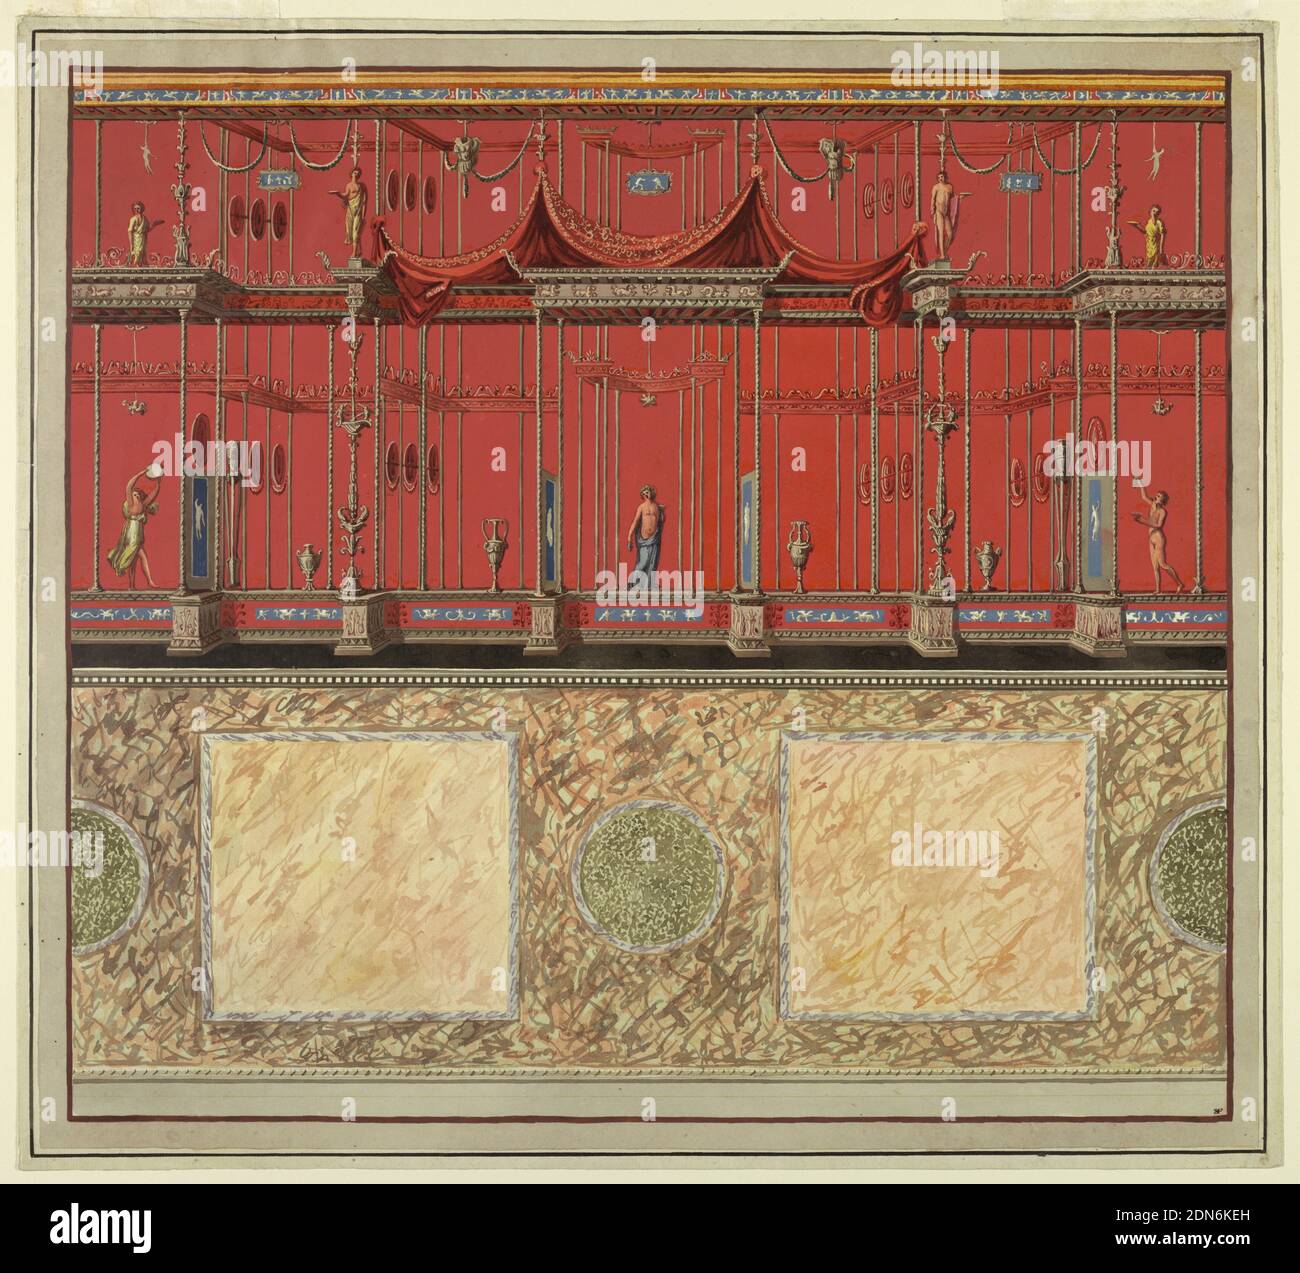 Wall Decoration, Domus Aurea, Rome, Vincenzo Brenna, Italian, 1745 – 1820, Franciszek Smugliewicz, 1745 – 1807, Brush and gouache, watercolor, over etching trimmed to the plate mark, Design for a wall decoration. View of red colored wall with grotesques above a rendering of a marble wall with inlaid squares and circles. Grotesque motif consists of open framework compartments surmounted with figures at left and right and draped material at center., Rome, Italy, 1776–77, wallpaper designs, Print Stock Photo